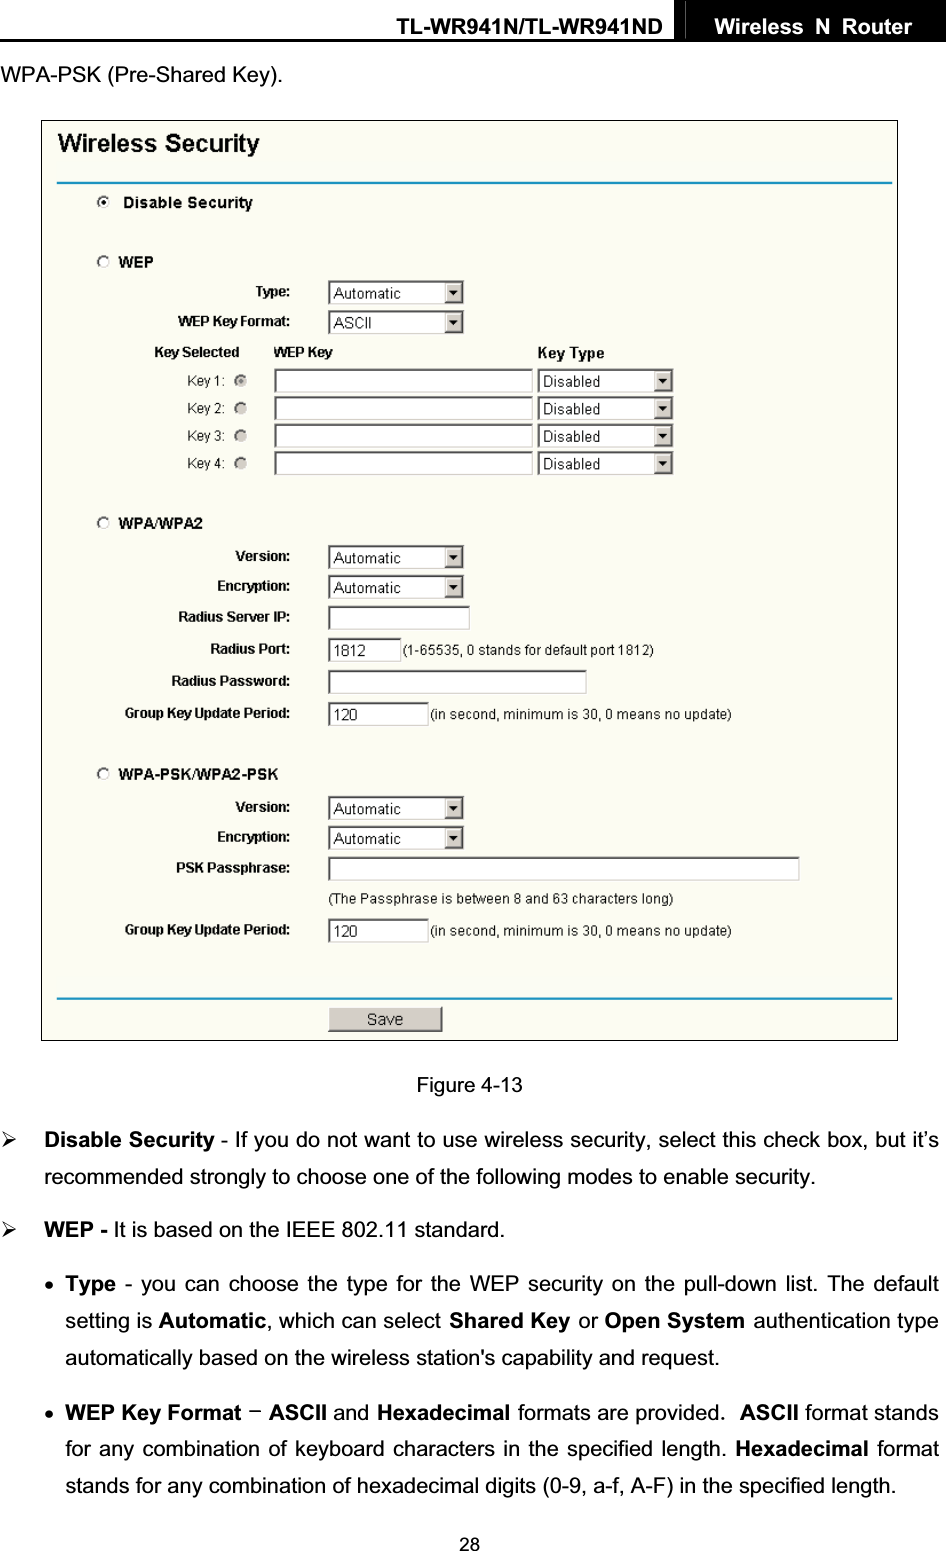 TL-WR941N/TL-WR941ND  Wireless N Router  28WPA-PSK (Pre-Shared Key). Figure 4-13   ¾Disable Security - If you do not want to use wireless security, select this check box, but it’s recommended strongly to choose one of the following modes to enable security. ¾WEP - It is based on the IEEE 802.11 standard. xType - you can choose the type for the WEP security on the pull-down list. The default setting is Automatic, which can selectShared Keyor Open Systemauthentication type automatically based on the wireless station&apos;s capability and request. xWEP Key FormatASCII andHexadecimalformats are providedASCII format stands for any combination of keyboard characters in the specified length. Hexadecimal format stands for any combination of hexadecimal digits (0-9, a-f, A-F) in the specified length. 